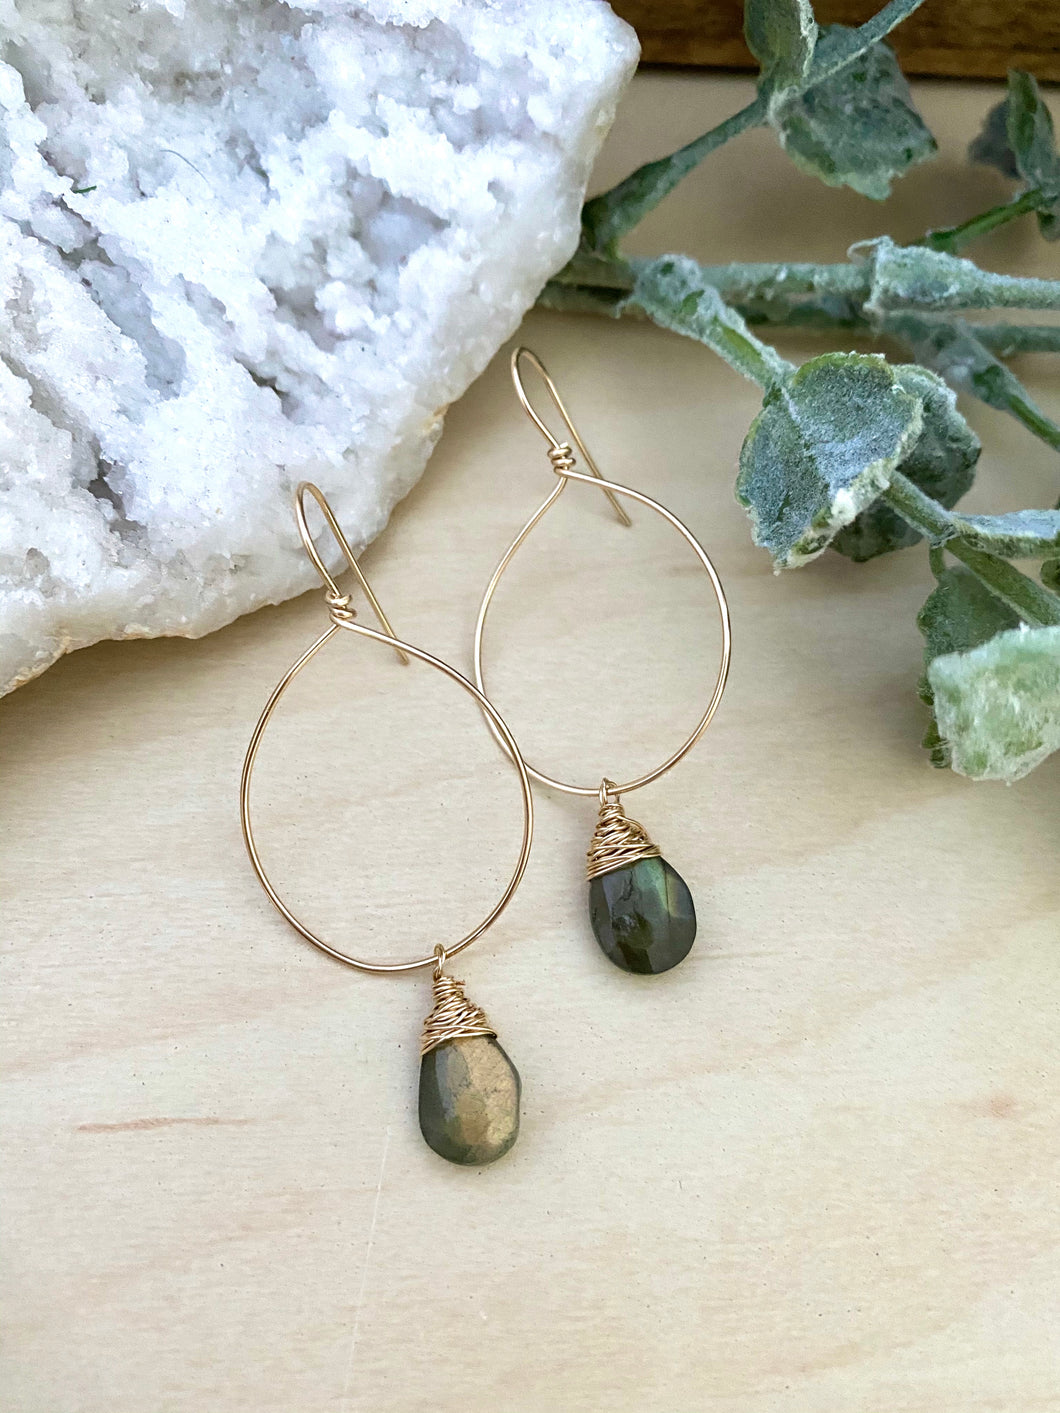 Hoop Earrings with Labradorite Drop - Gold fill or Sterling Silver